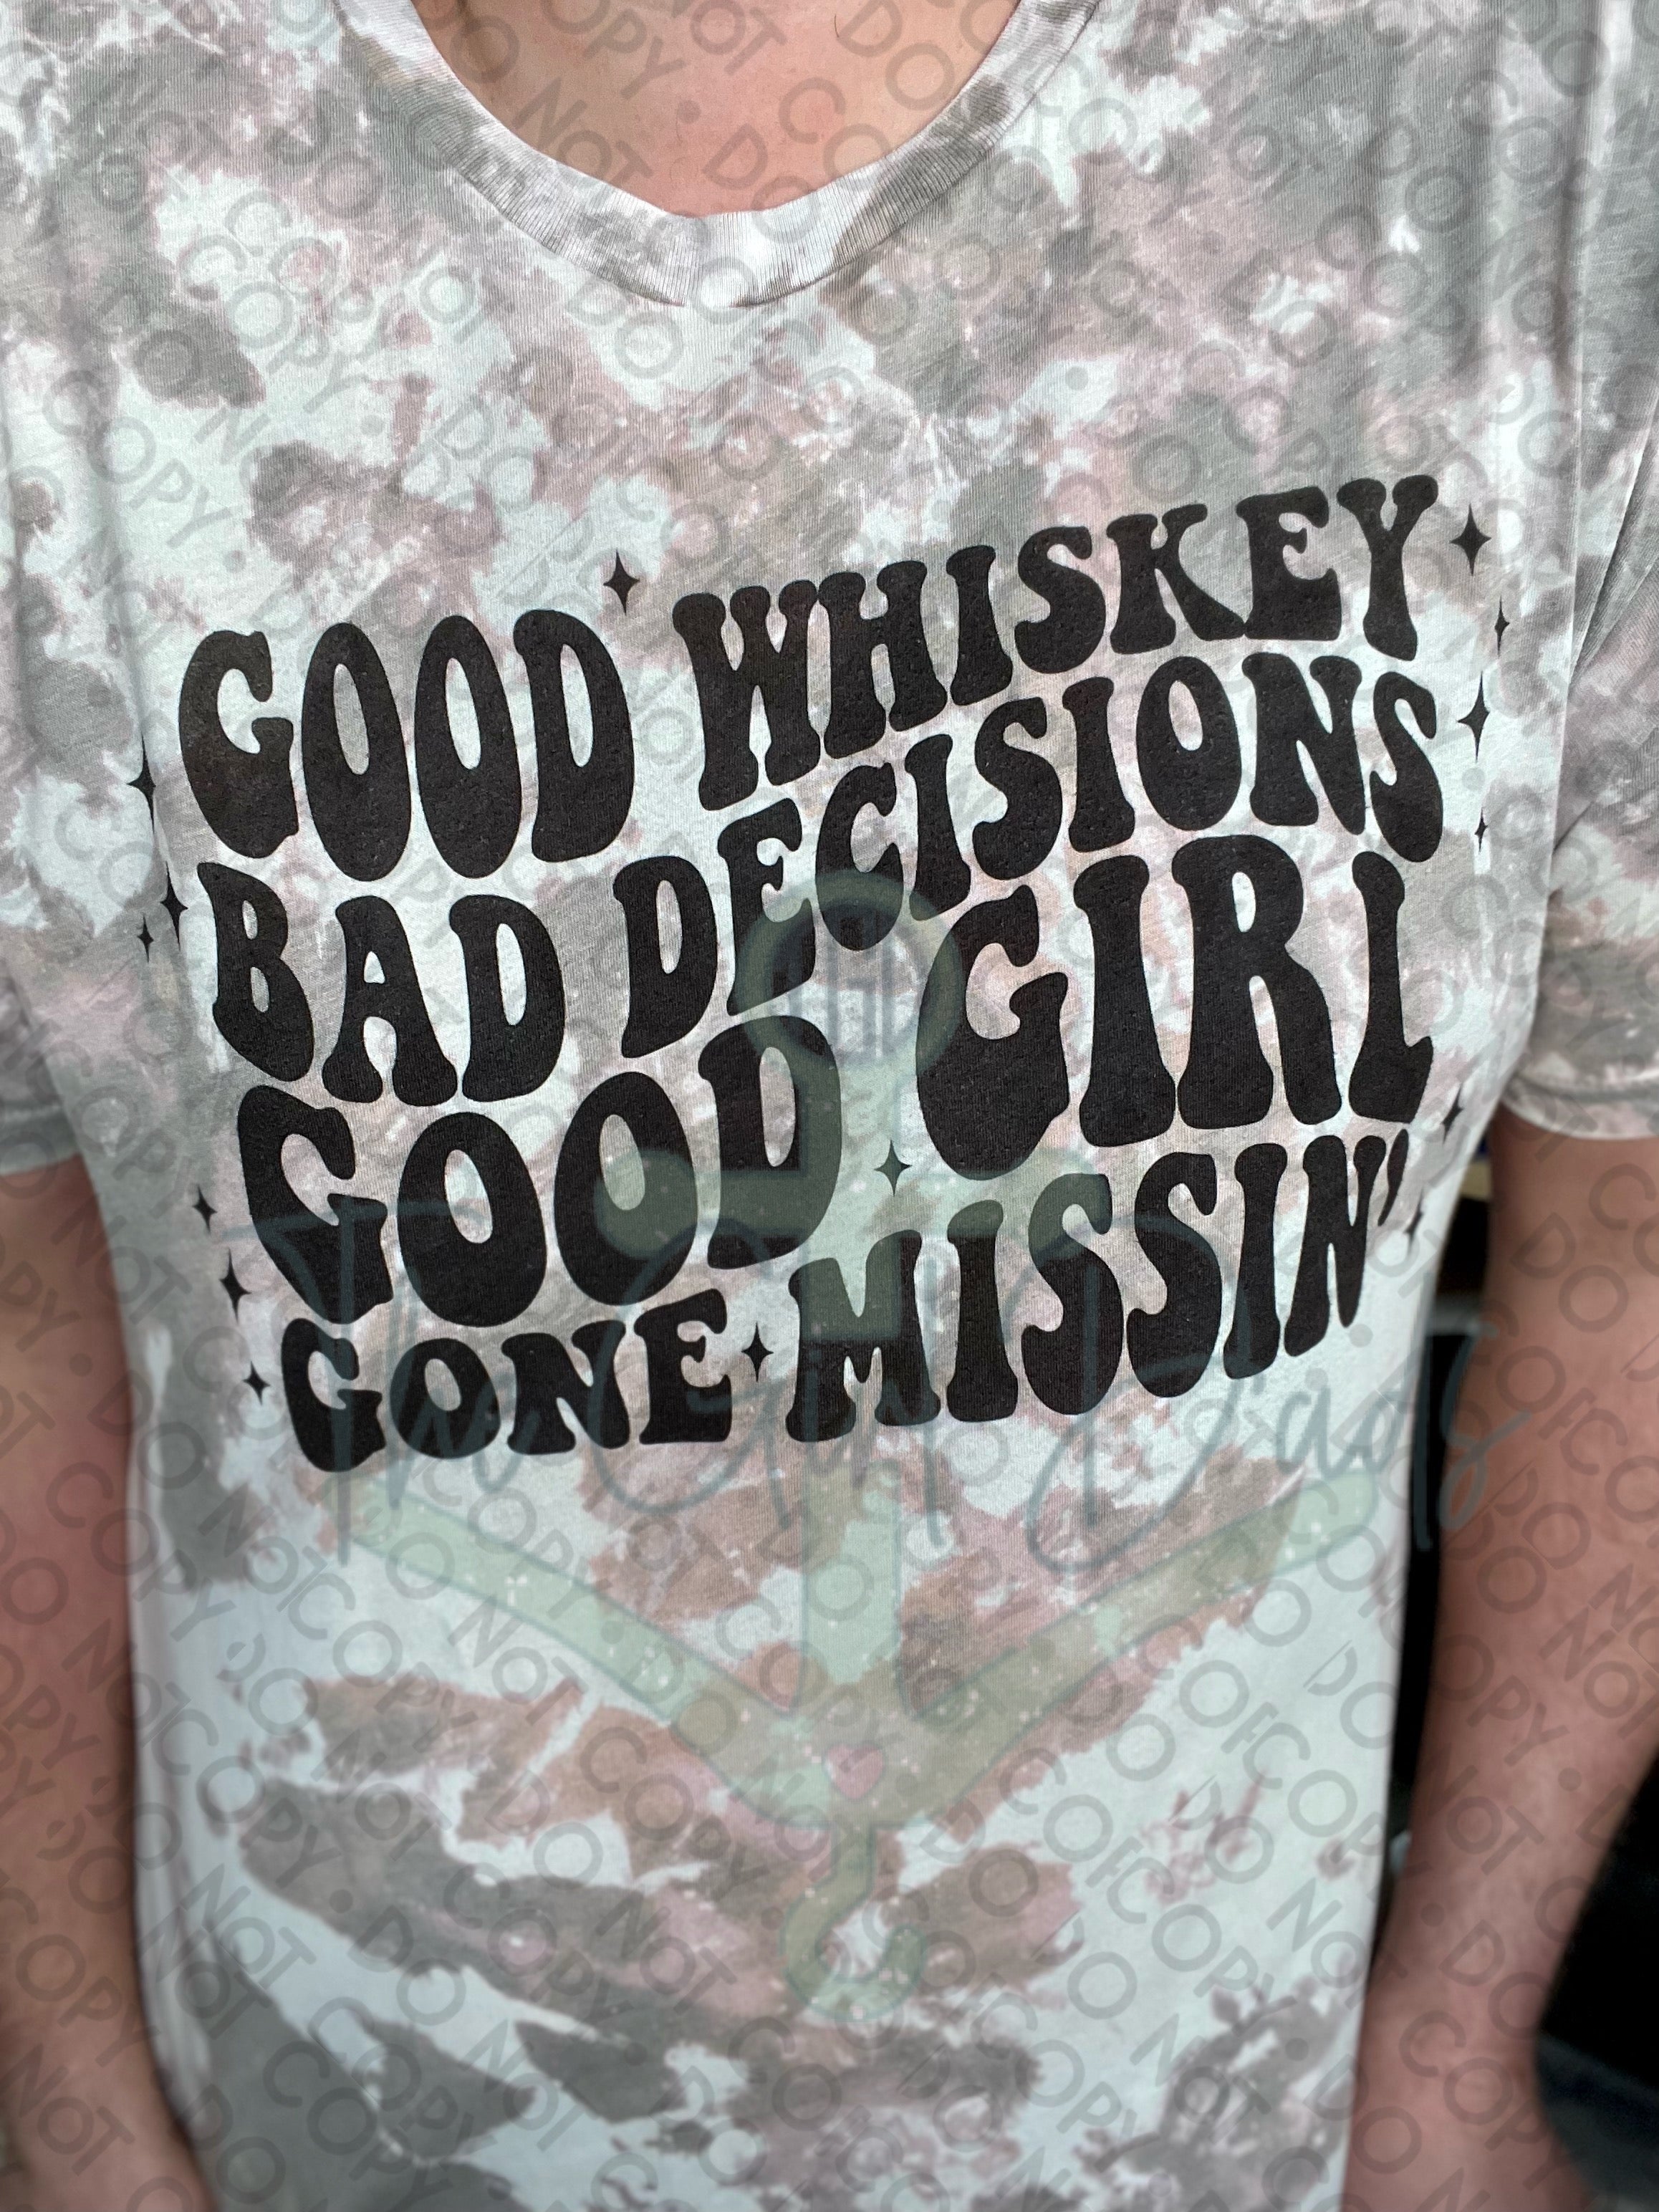 Good Whiskey Bad Decisions (Front & Back) Top Design